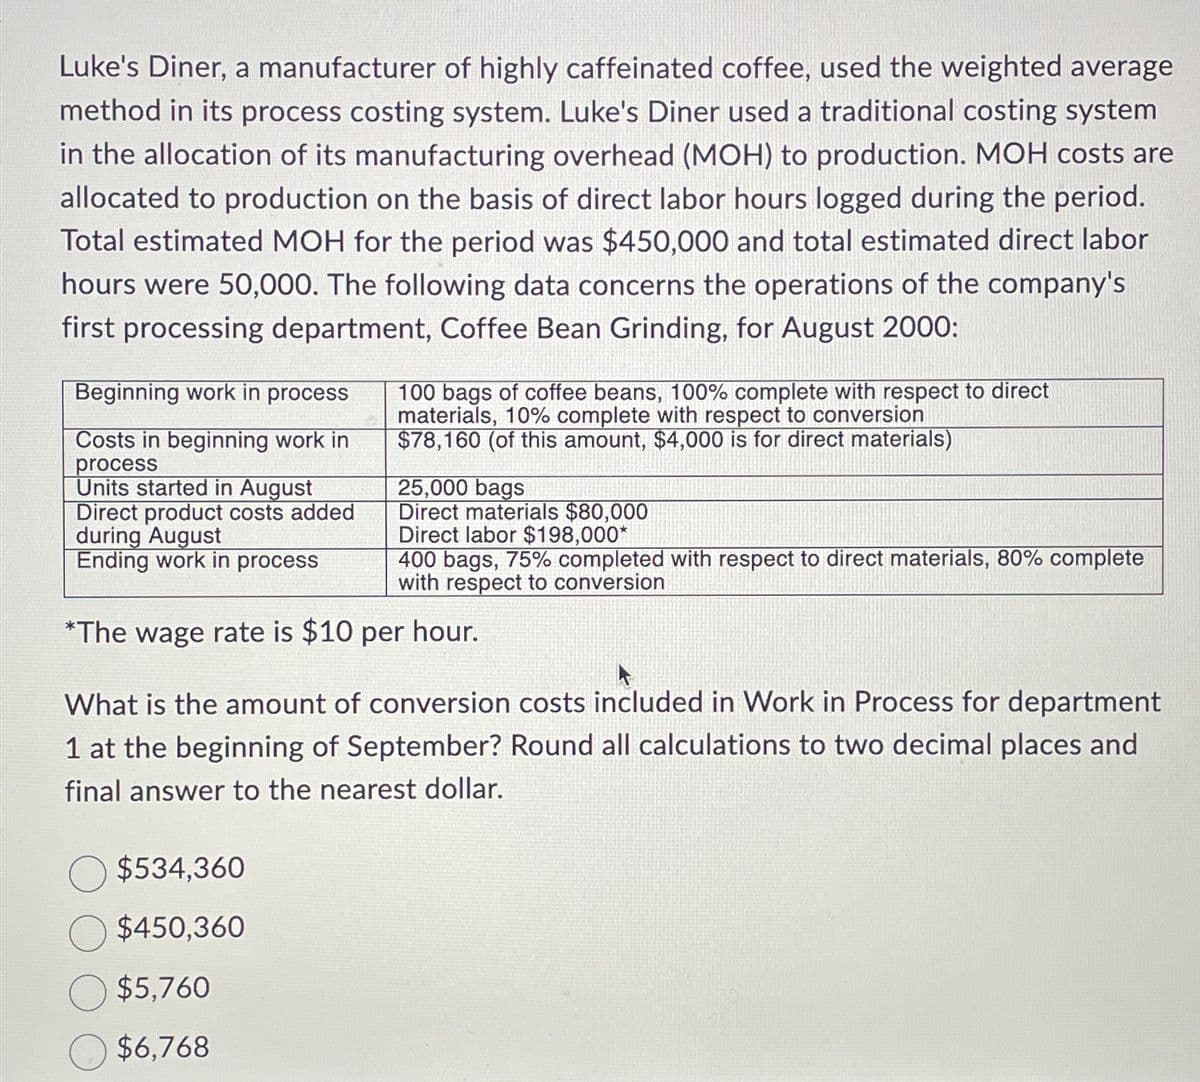 Luke's Diner, a manufacturer of highly caffeinated coffee, used the weighted average
method in its process costing system. Luke's Diner used a traditional costing system
in the allocation of its manufacturing overhead (MOH) to production. MOH costs are
allocated to production on the basis of direct labor hours logged during the period.
Total estimated MOH for the period was $450,000 and total estimated direct labor
hours were 50,000. The following data concerns the operations of the company's
first processing department, Coffee Bean Grinding, for August 2000:
Beginning work in process
Costs in beginning work in
process
Units started in August
Direct product costs added
during August
Ending work in process
100 bags of coffee beans, 100% complete with respect to direct
materials, 10% complete with respect to conversion
$78,160 (of this amount, $4,000 is for direct materials)
25,000 bags
Direct materials $80,000
Direct labor $198,000*
$534,360
$450,360
$5,760
$6,768
400 bags, 75% completed with respect to direct materials, 80% complete
with respect to conversion
*The wage rate is $10 per hour.
What is the amount of conversion costs included in Work in Process for department
1 at the beginning of September? Round all calculations to two decimal places and
final answer to the nearest dollar.